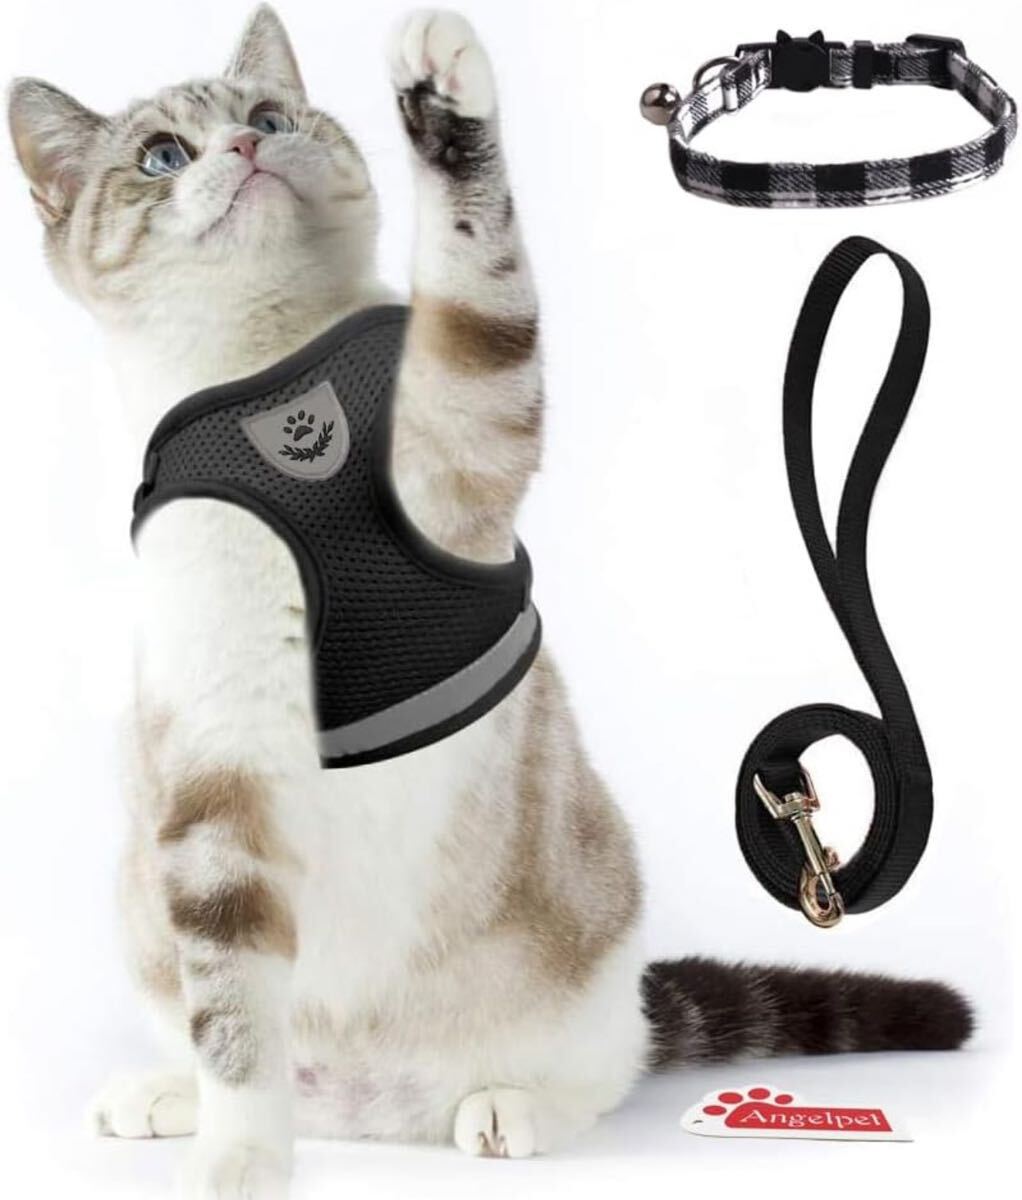  cat for Harness harness soft ... Lead attaching coming out not night reflection mesh Harness ventilation super light weight size adjustment possibility (L size (x 1), black )